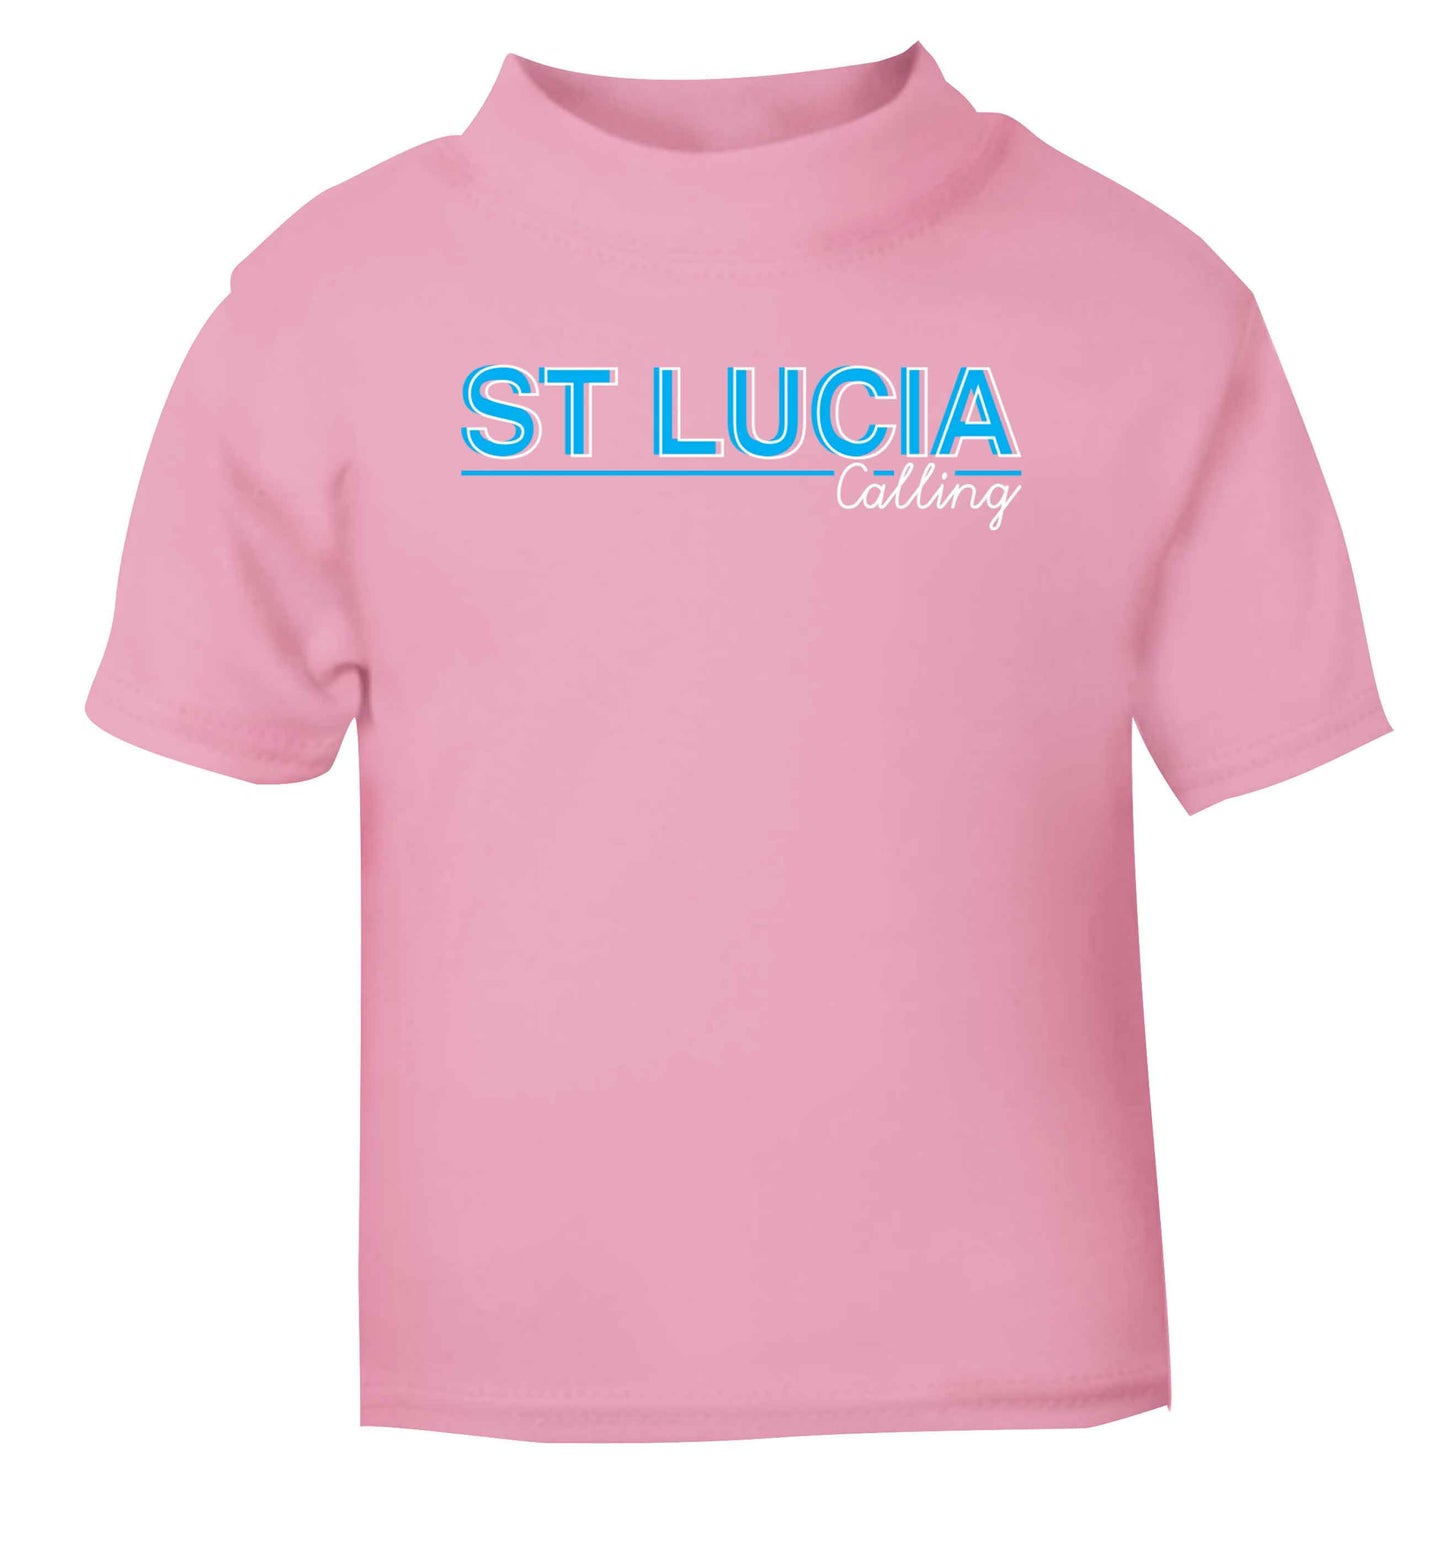 St Lucia calling light pink Baby Toddler Tshirt 2 Years